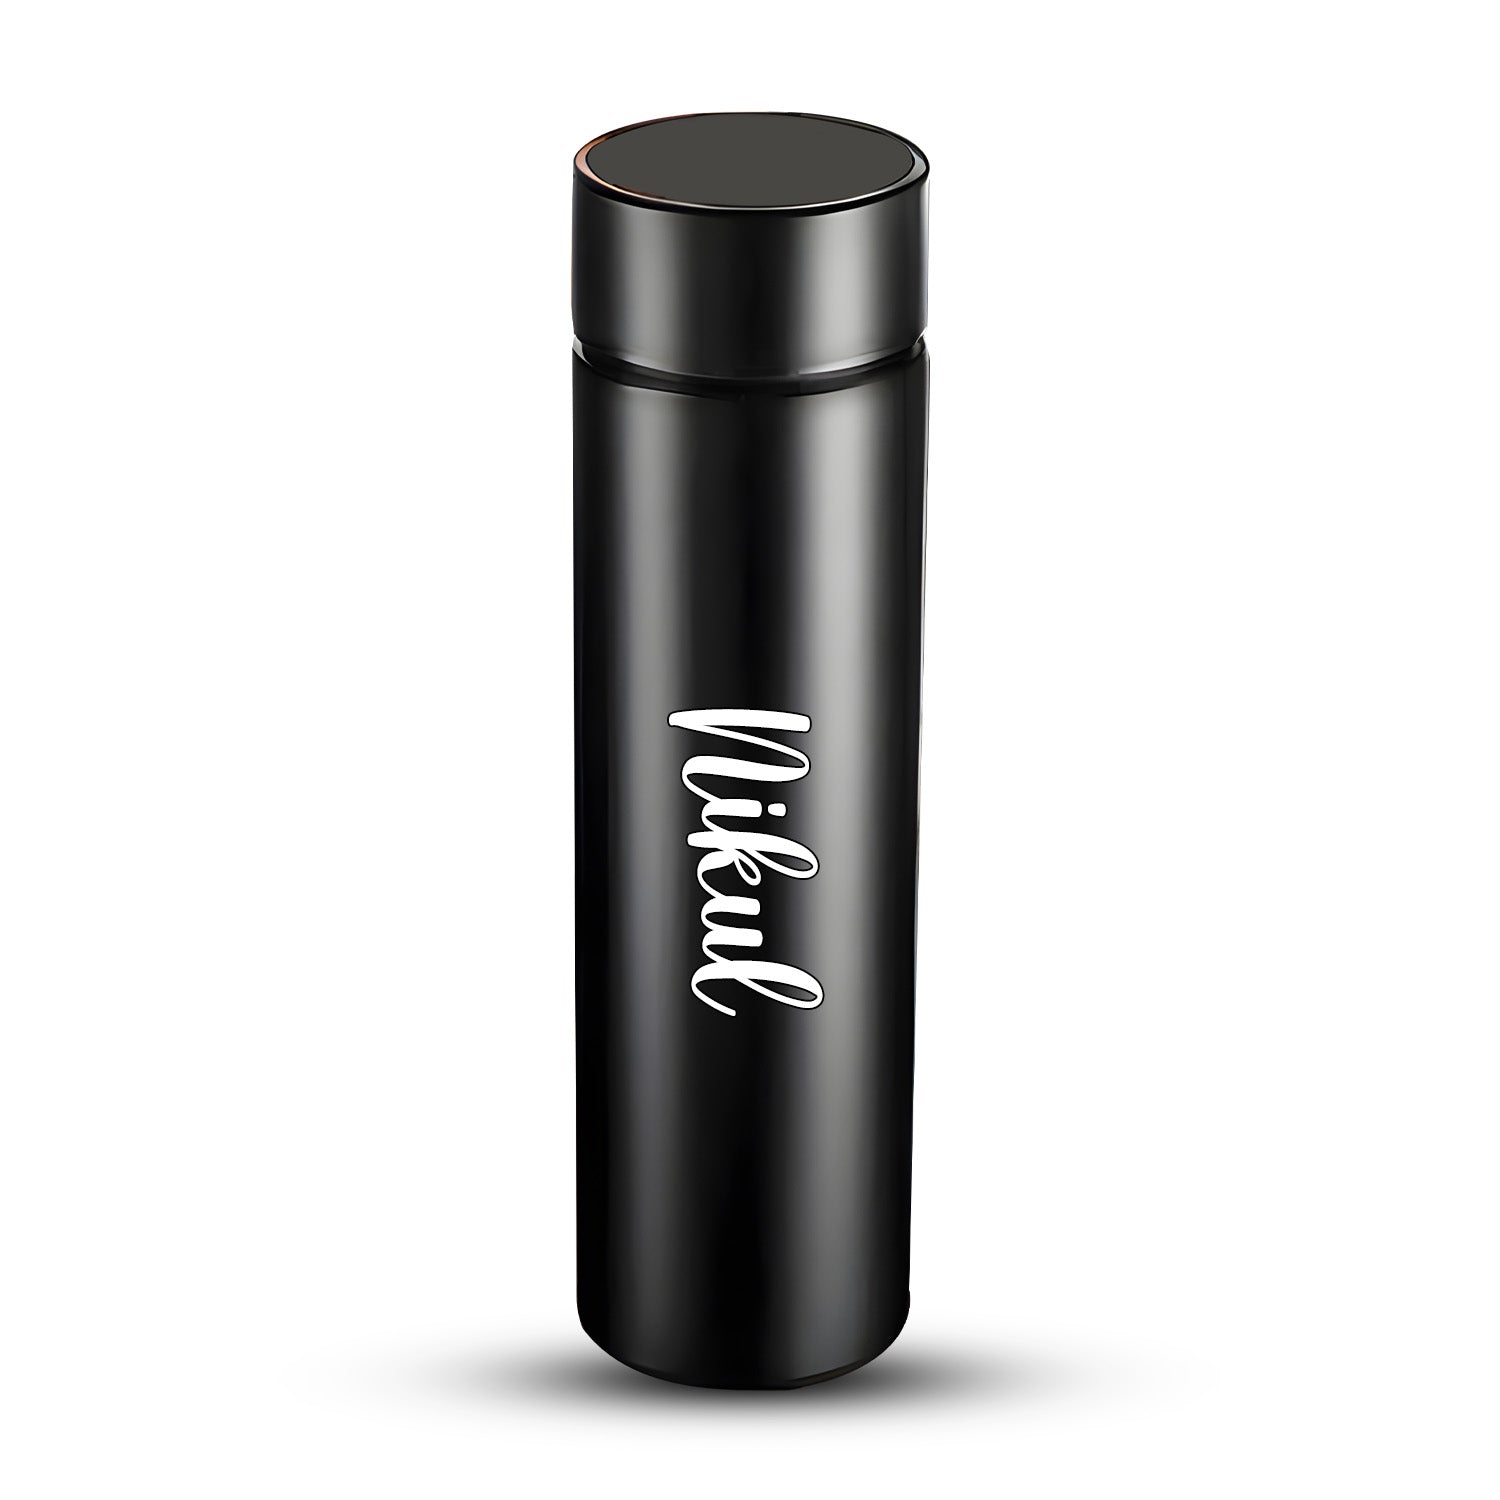 0726 Customized/Personalized Stainless Steel Smart Water Bottle with Smart LCD Temperature Touch Screen | Gifting Custom Name Water Bottle | Gifts for Boyfriend/Girlfriend/Employee | 500ML